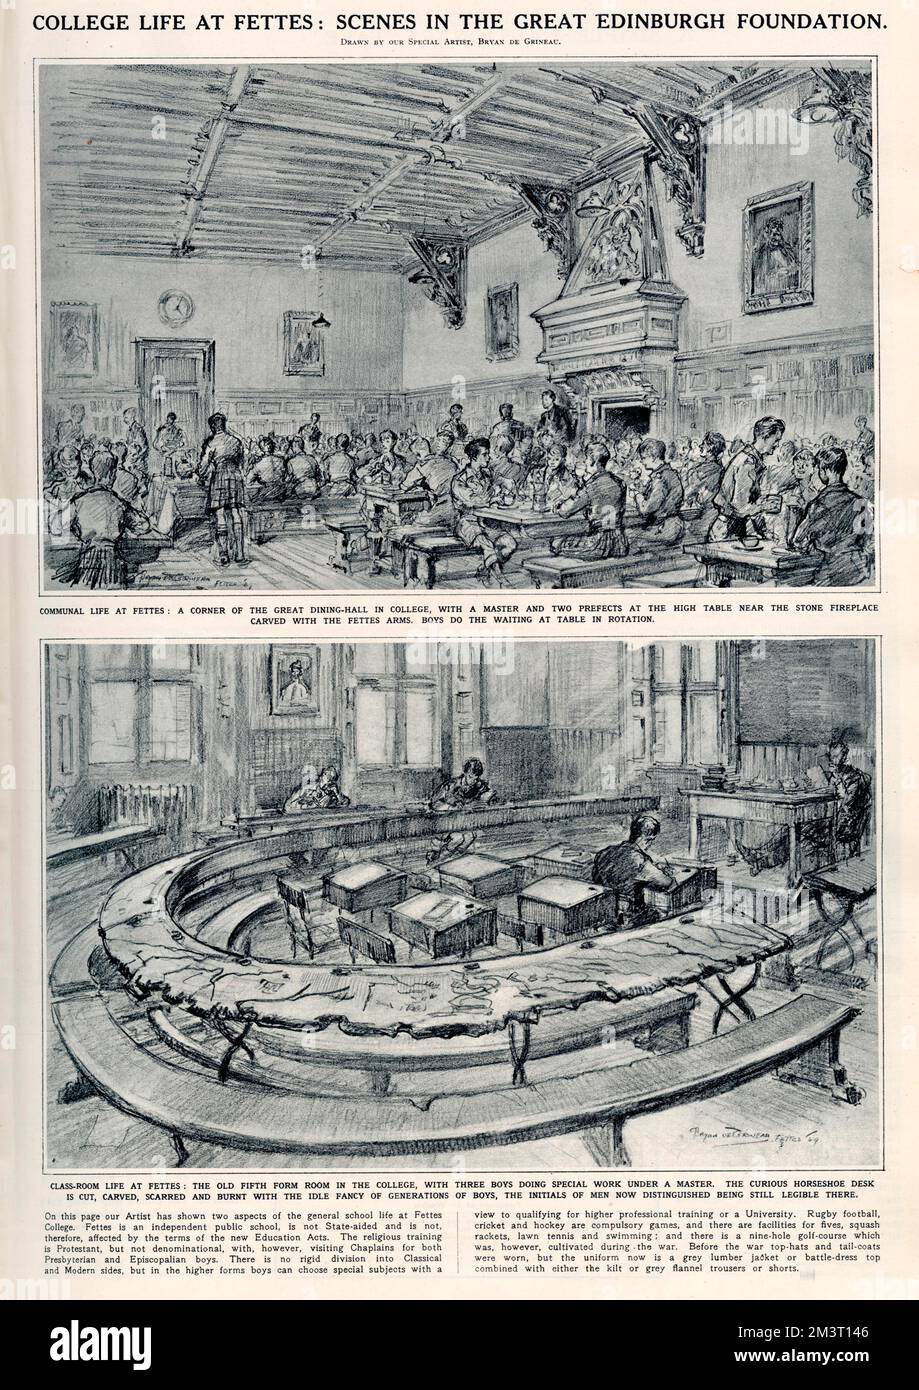 Sketch by Bryan de Grineau showing the great dining-hall at Fettes College, Edinburgh. A master and two prefects are dining near the large stone fireplace carved with the Fettes College arms. Pupils took turns to serve meals. Stock Photo